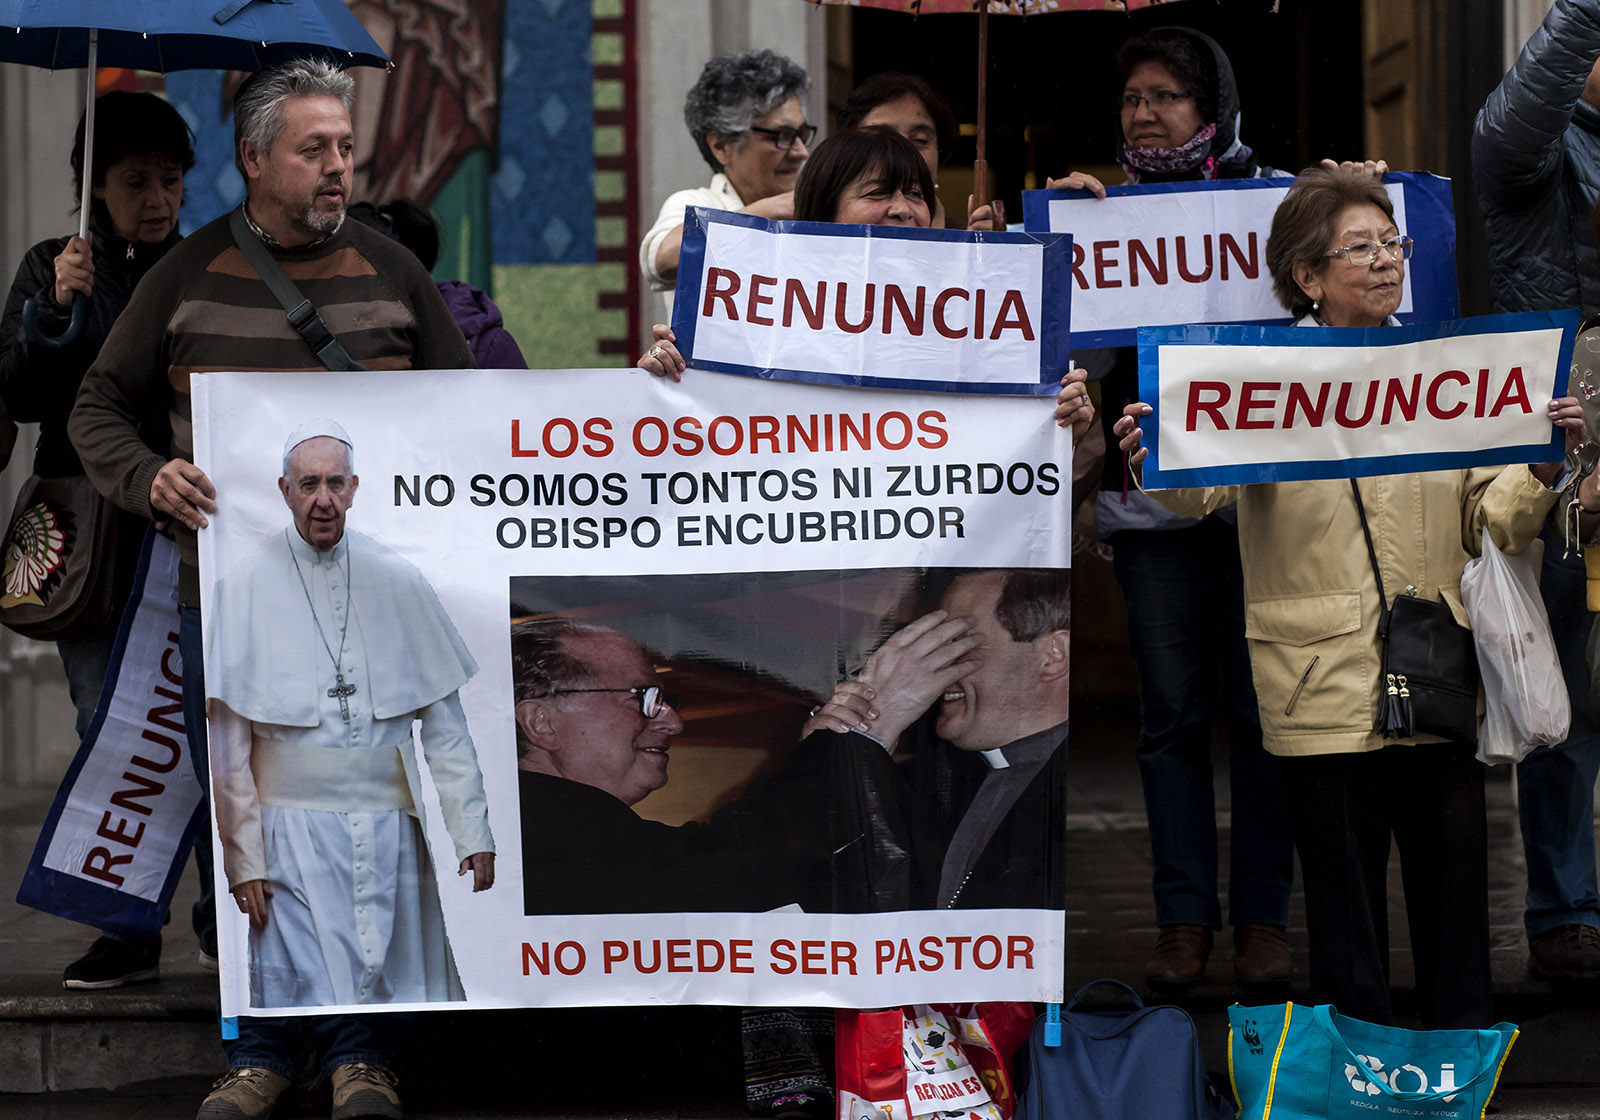 Catholics protesting in Osorno, Chile, on January 4, 2018, against Bishop Juan Barros, who was appointed in 2015 by Pope Francis despite accusations of his having protected a pedophile priest